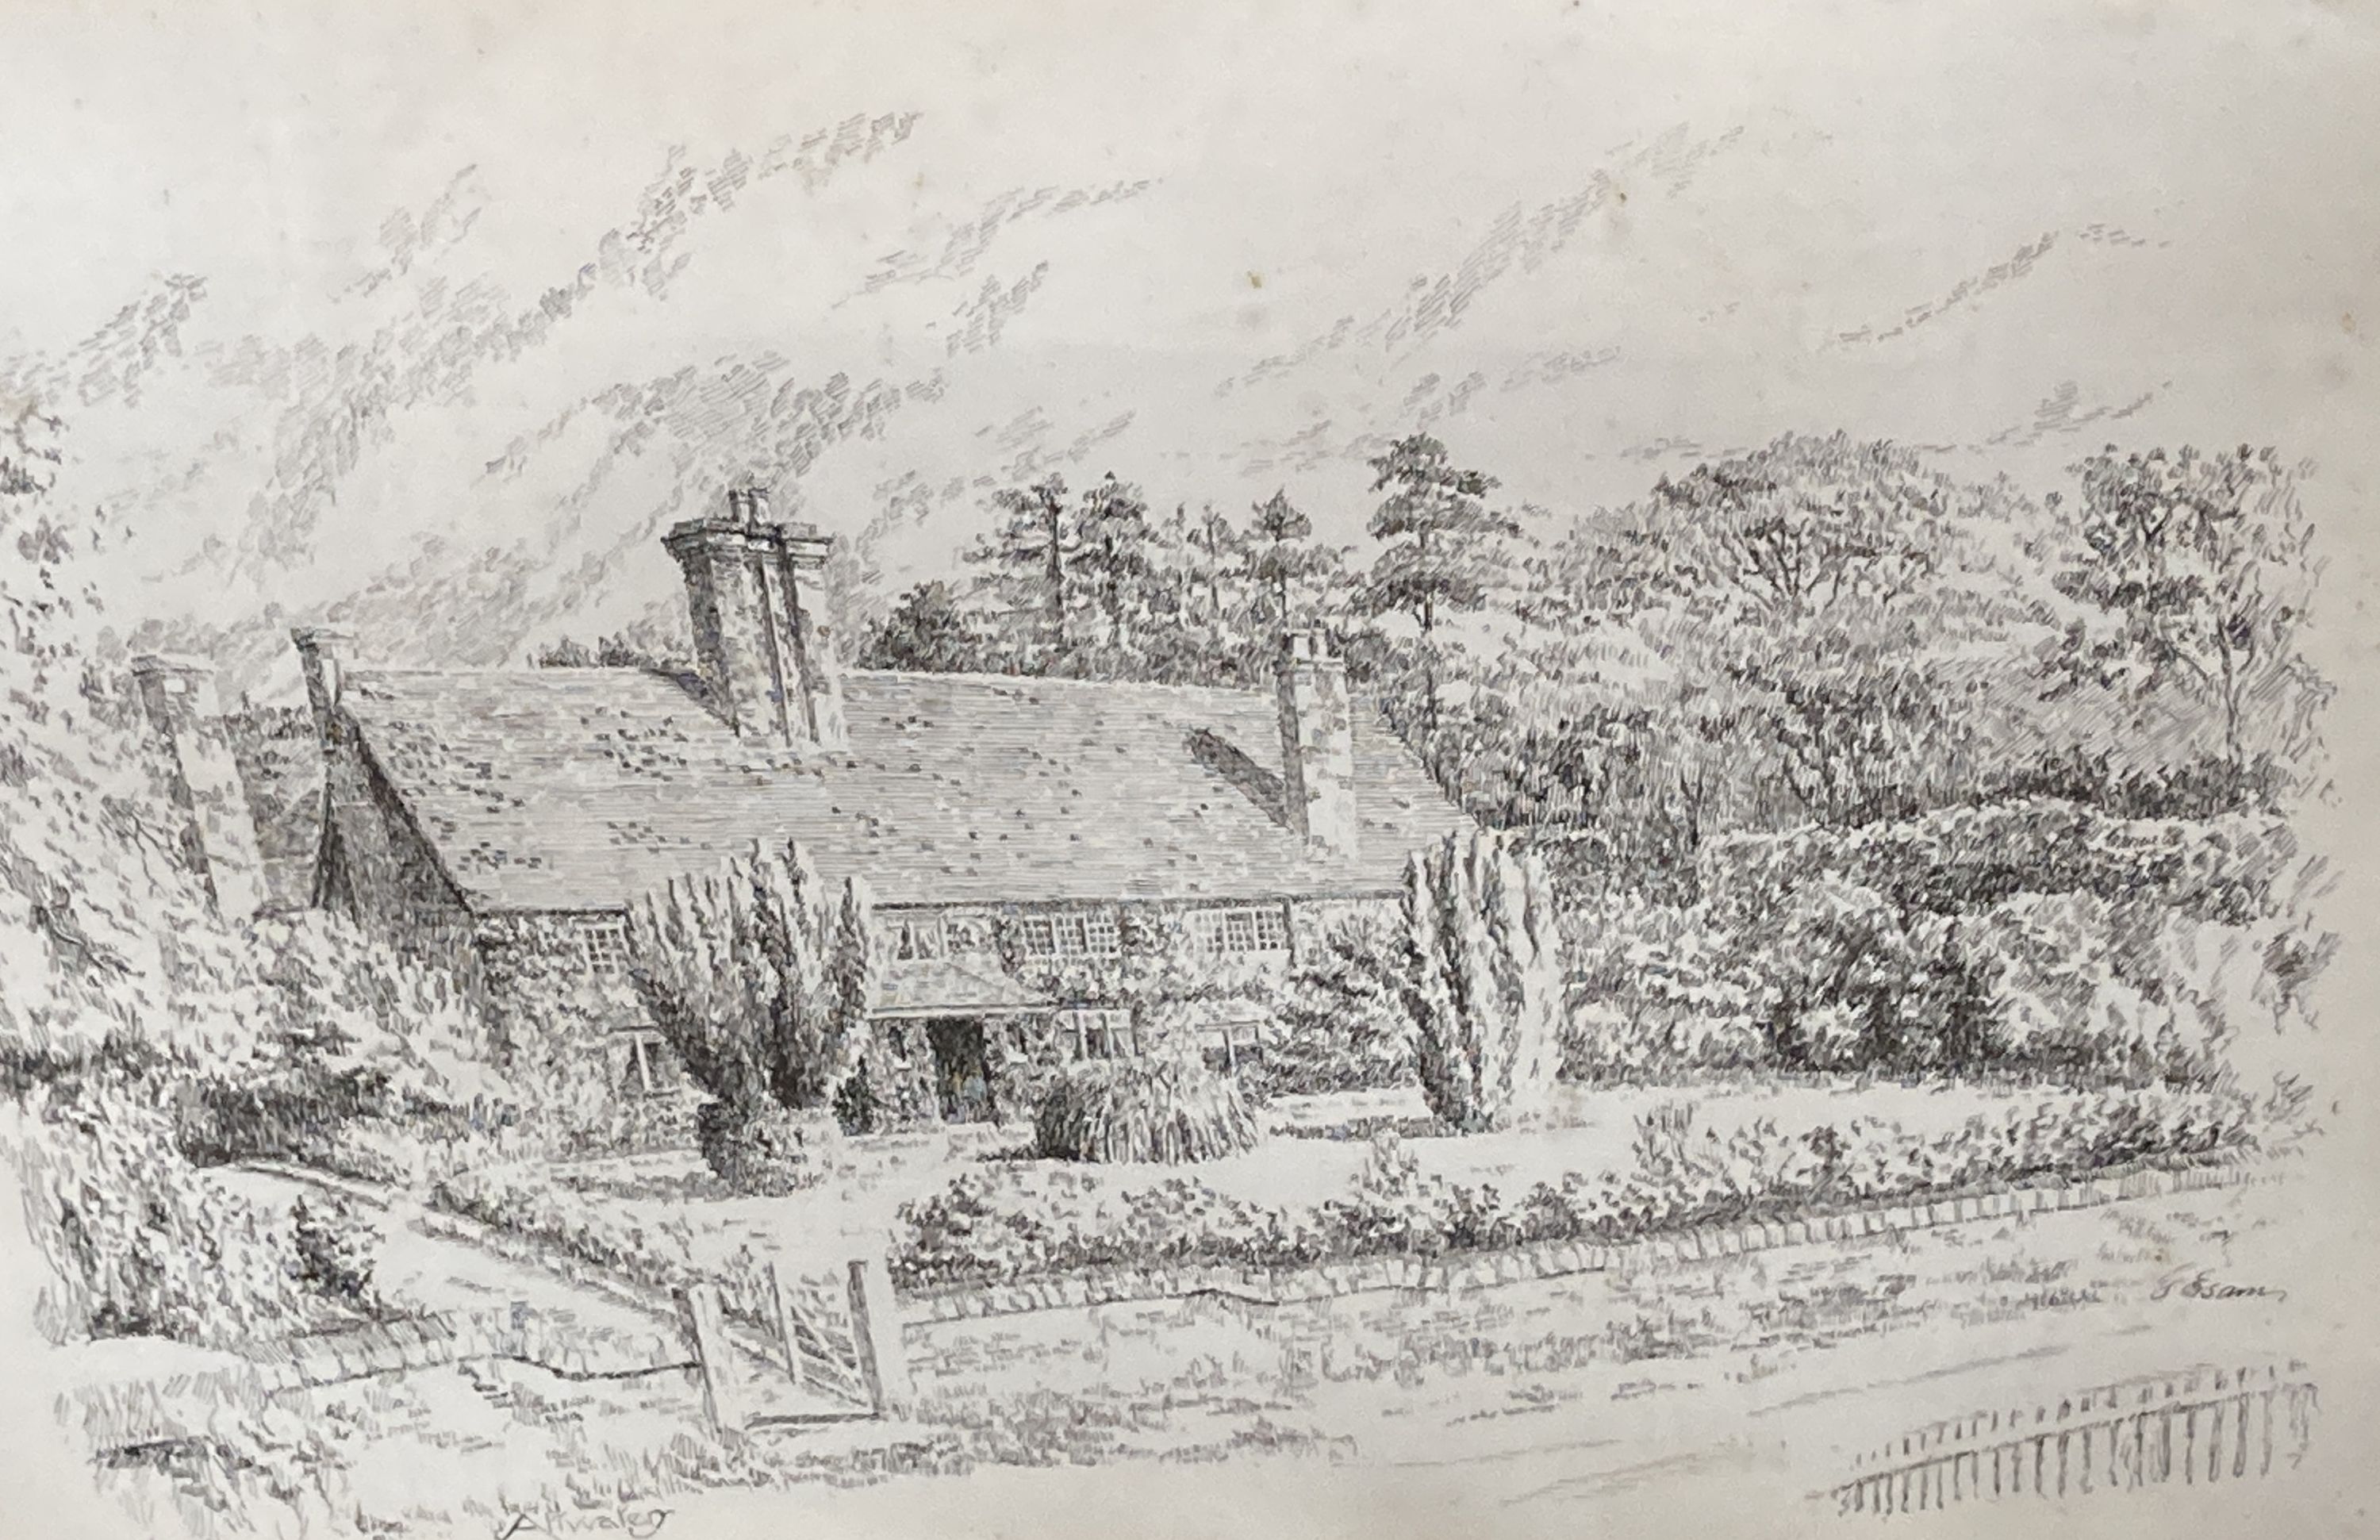 F. Esam c.1900, 5 pen and ink drawings: Highgate, Hawkhurst; Attwater; The Queens Hotel, Hawkhurst; St Lawrence Church, Hawkhurst and